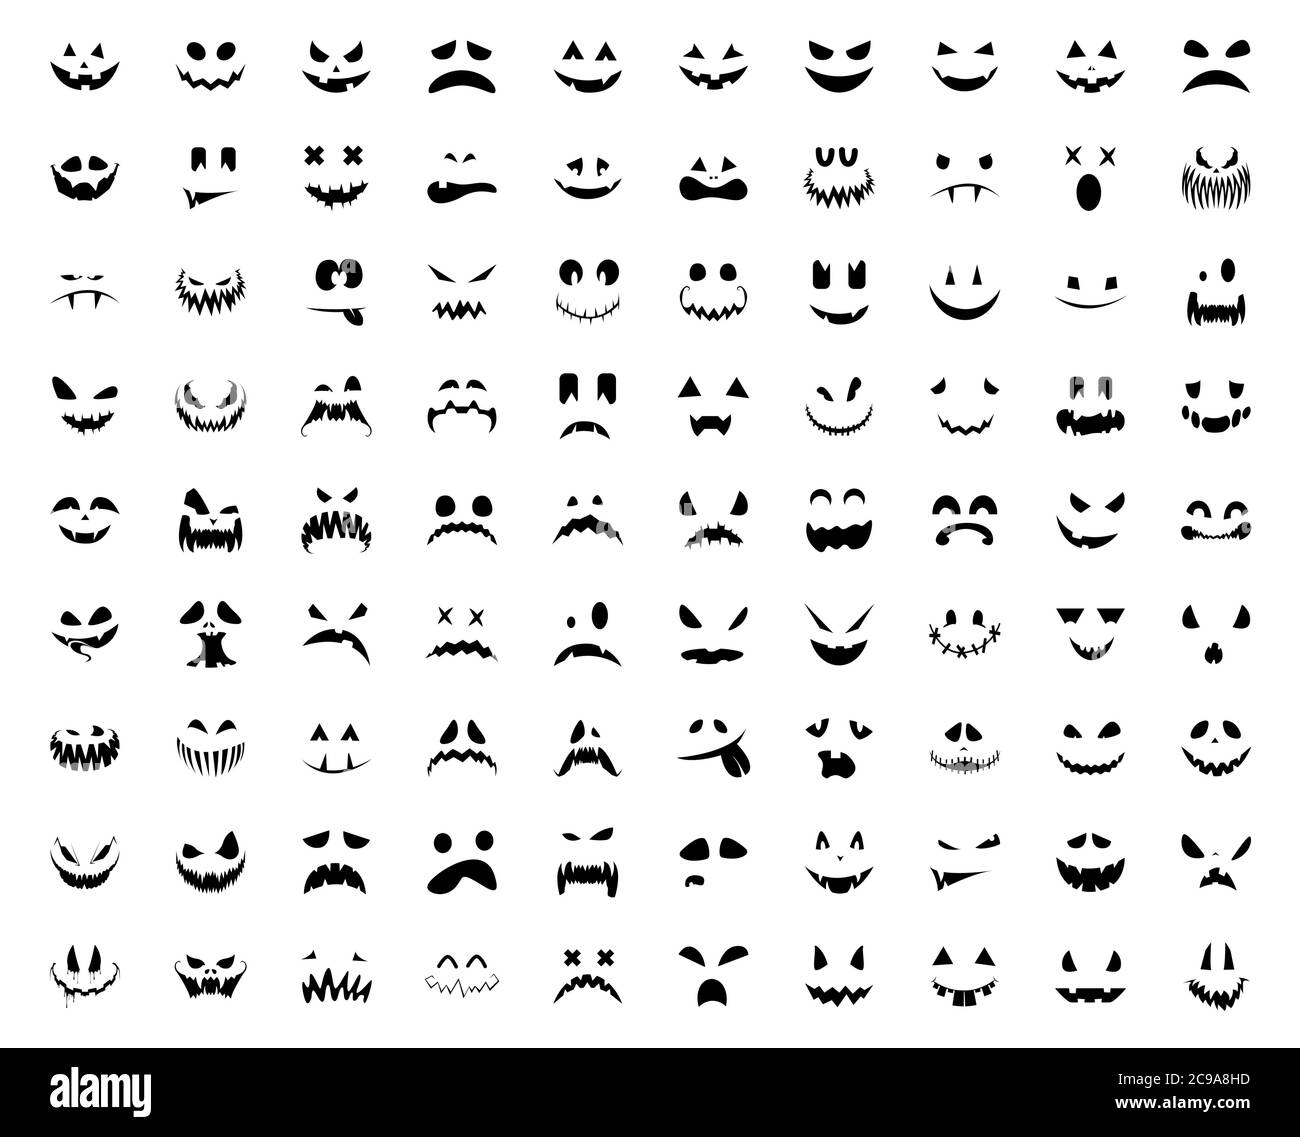 Halloween pumpkin faces icons set. Big set of scary pumpkin smile. Template for Halloween greeting card poster, brochure or flyer. Vector illustration Stock Vector